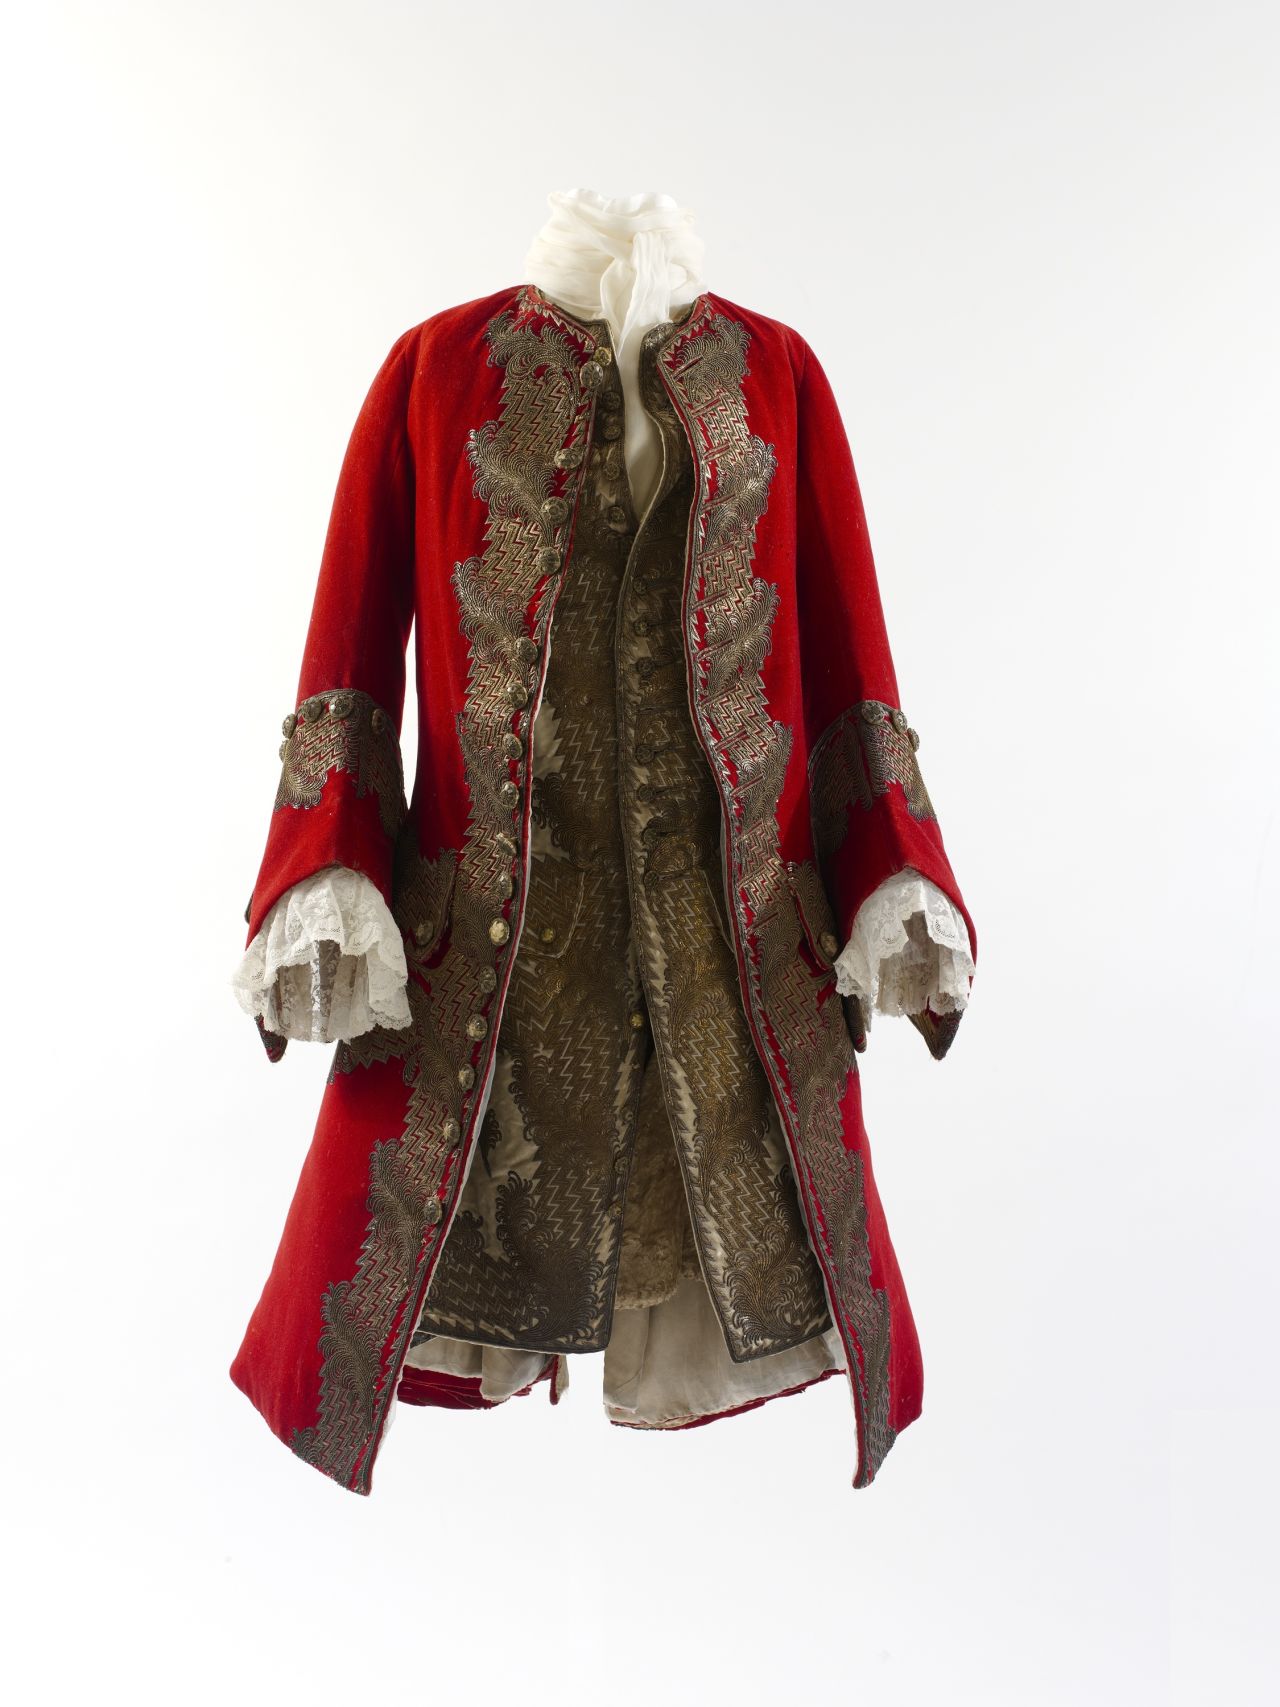 This wool broadcloth coat with gilt thread and sequin embroidery, and its matching waistcoa, are most likely British and hail from 1730. 